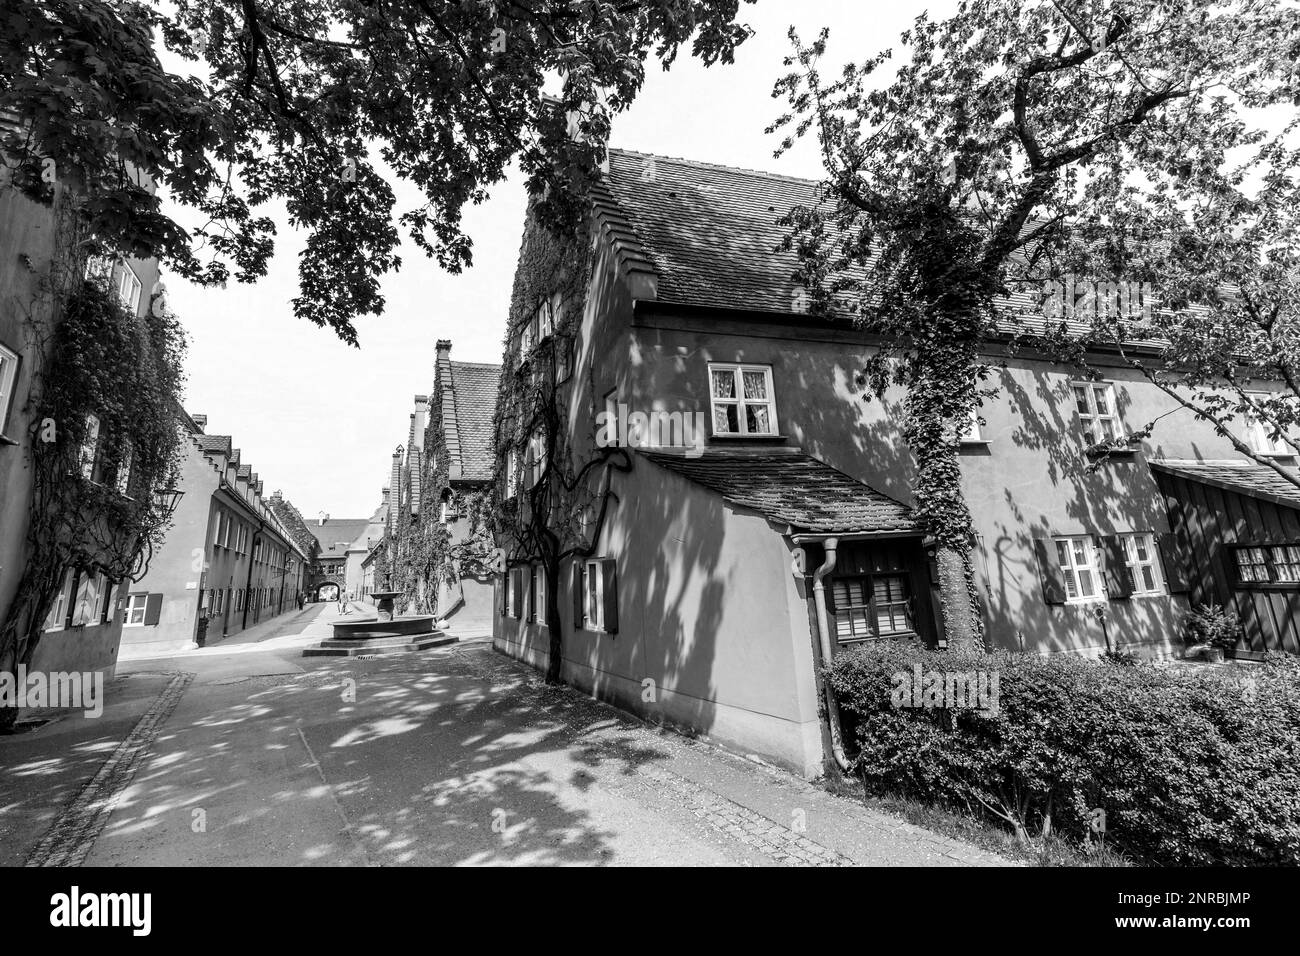 AUGSBURG, GERMANY - APRIL 29, 2015: The Fuggerei is the worlds oldest social housing complex still in use in Augsburg, Germany. Stock Photo